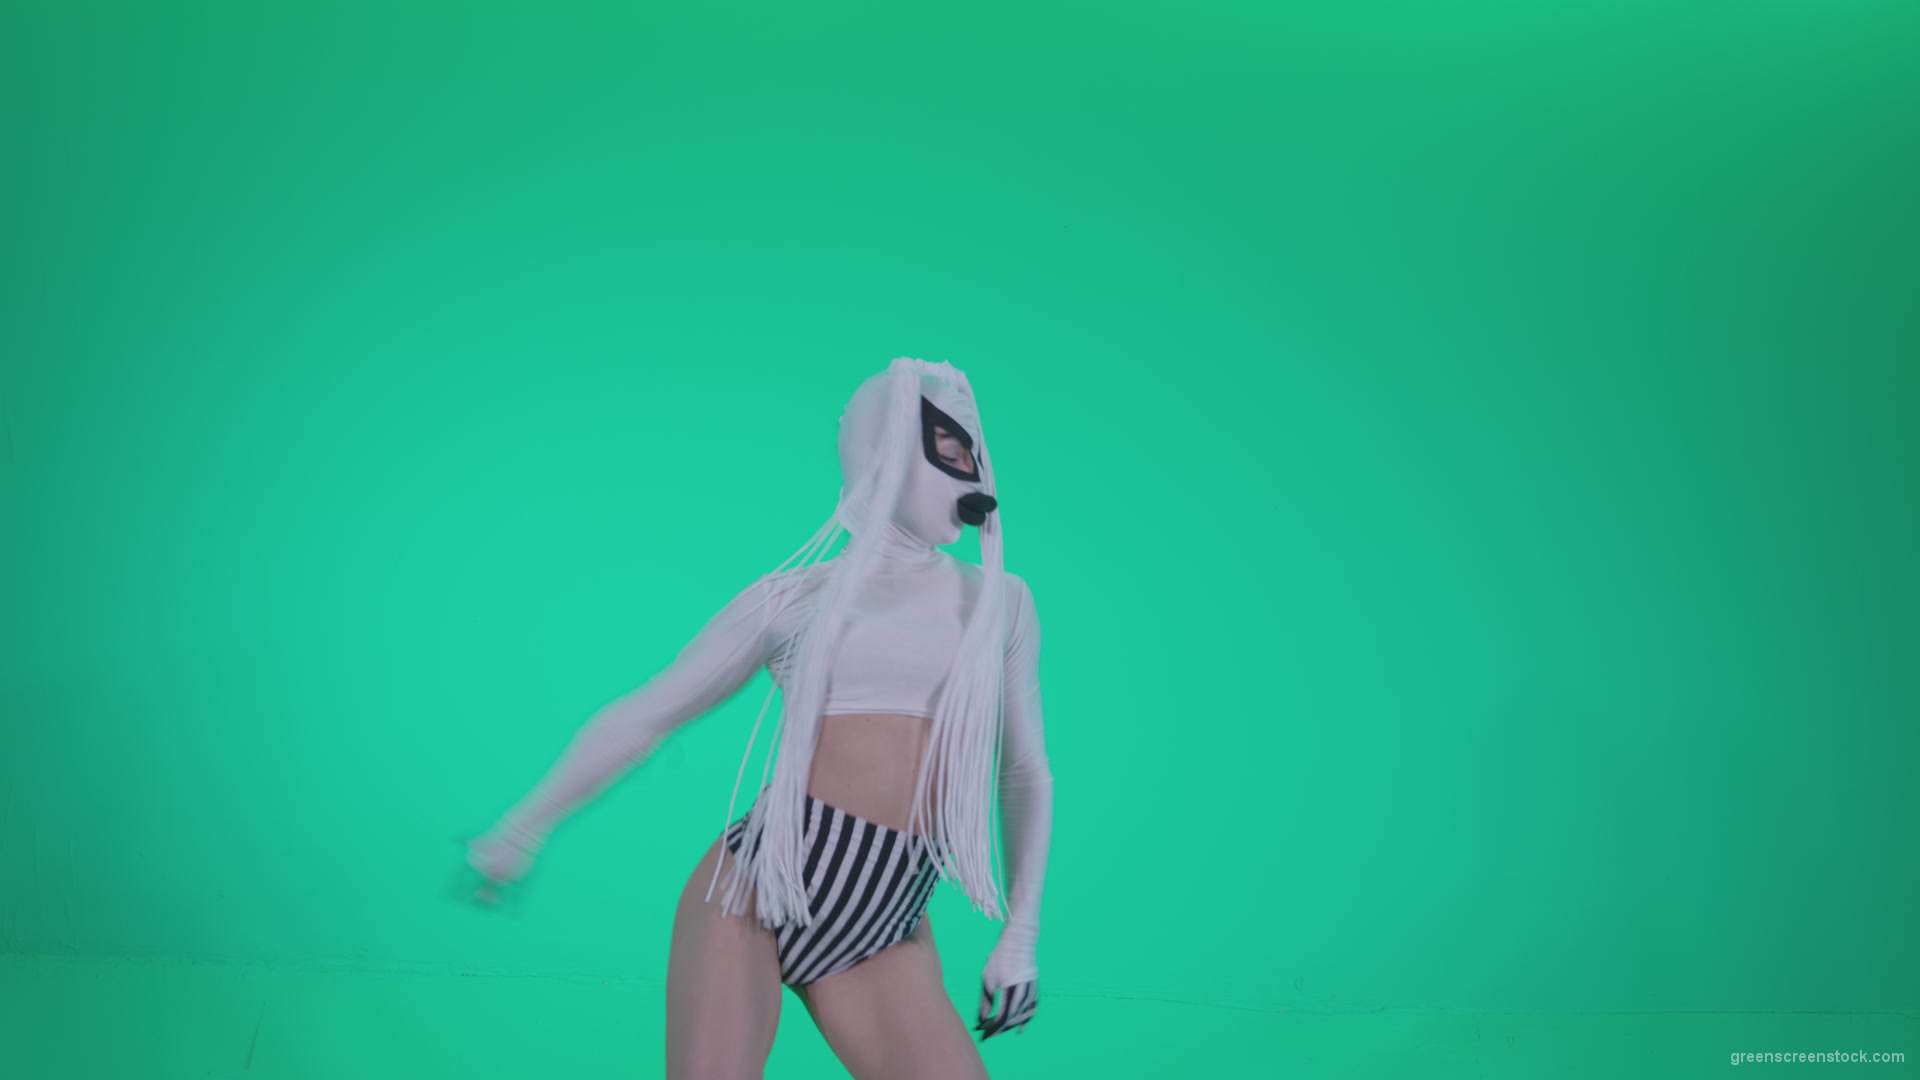 Go-go-Dancer-with-Latex-Top-t10-Green-Screen-Video-Footage_002 Green Screen Stock